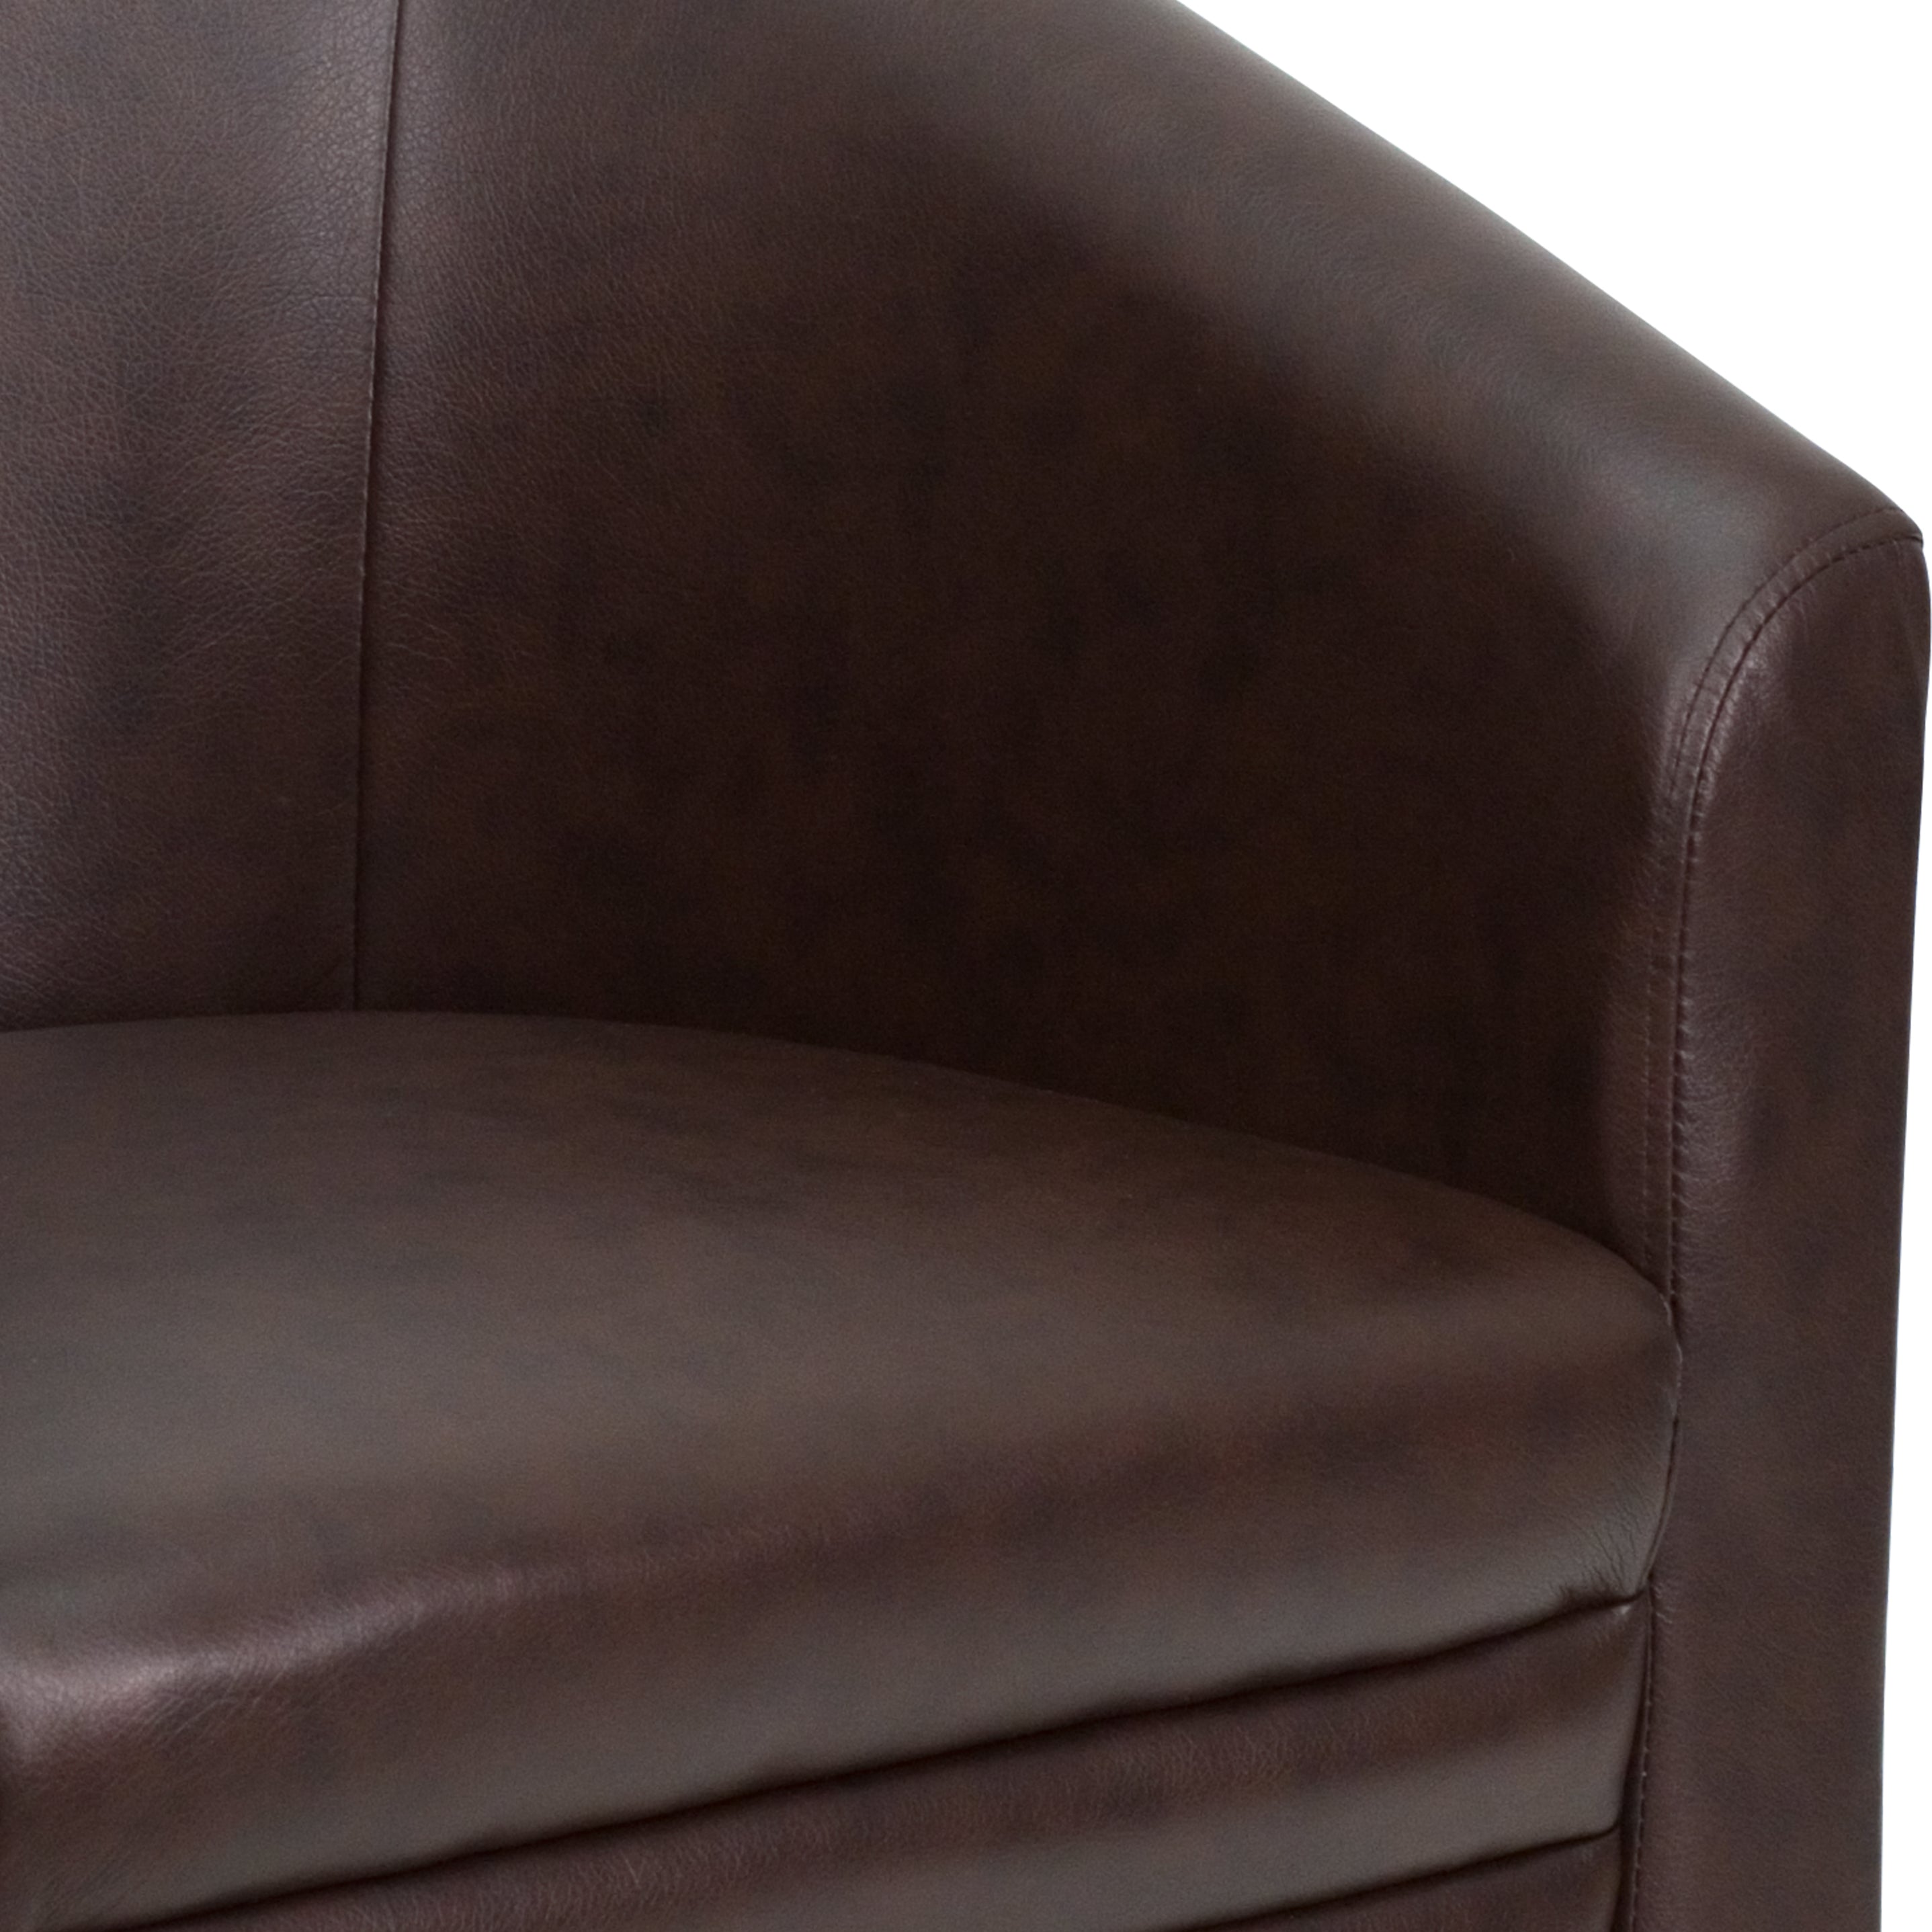 LeatherSoft Barrel-Shaped Guest Chair-Reception Chair-Flash Furniture-Wall2Wall Furnishings